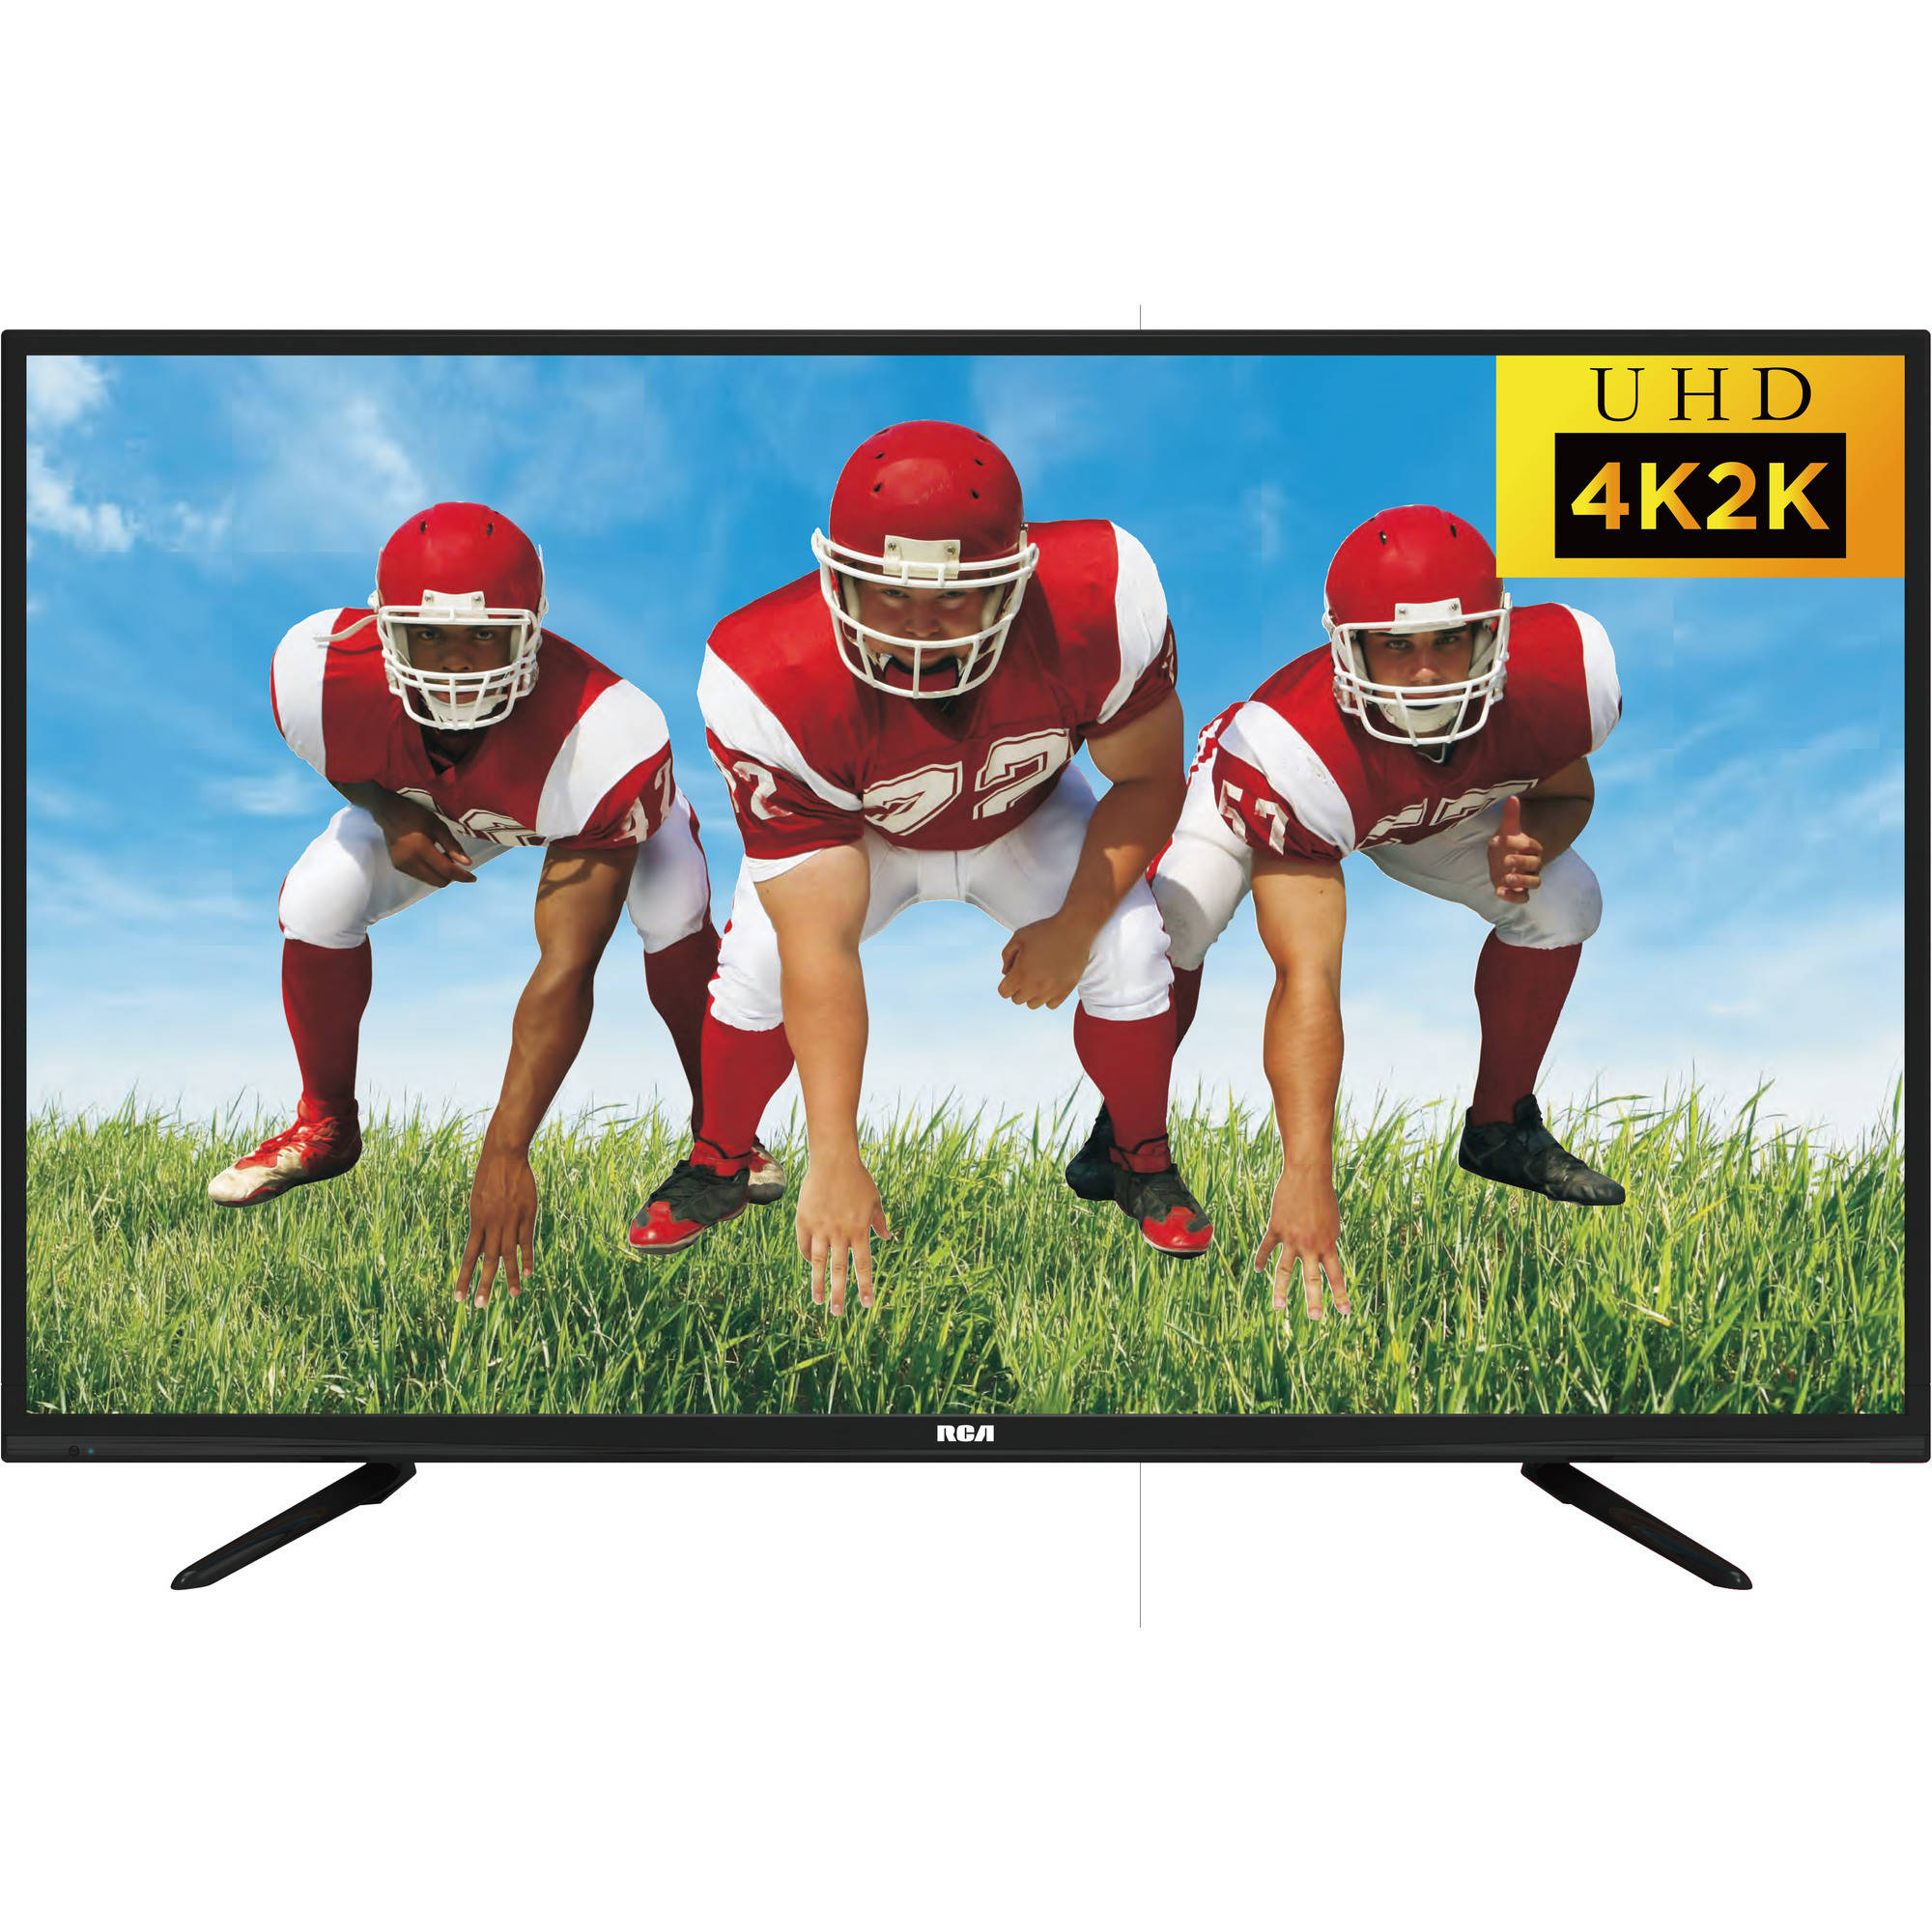 Price drop! RCA 50″ 4K TV for $230, free shipping